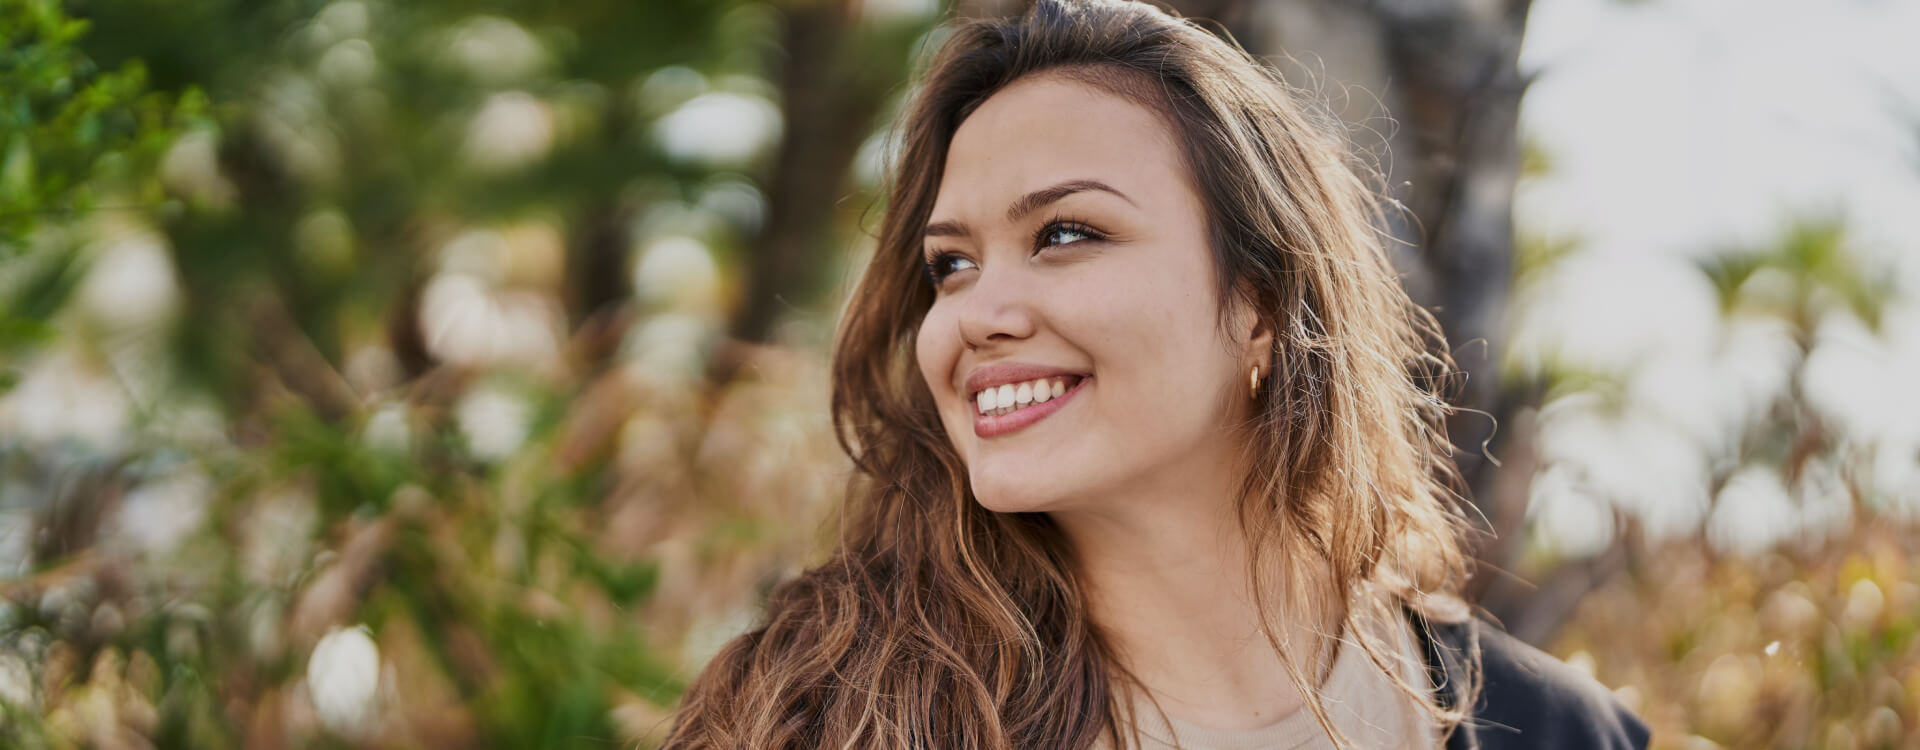 Full Mouth Dental Implants in Lititz | All on 4 Implants